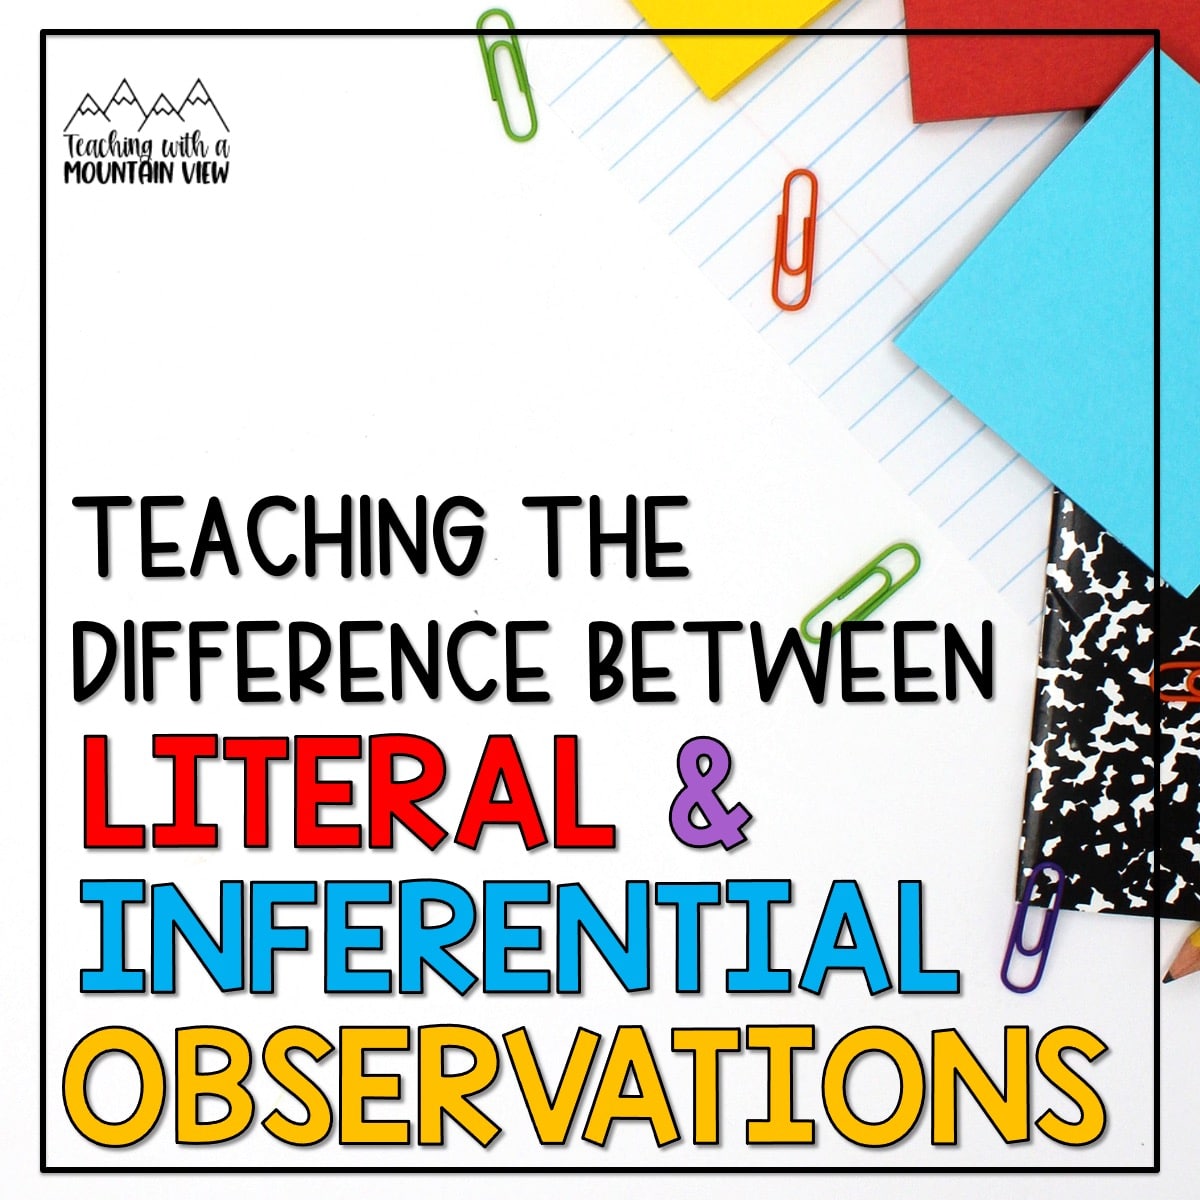 Teaching students the difference between literal and inferential thinking is one of my must-do lessons of every single school year